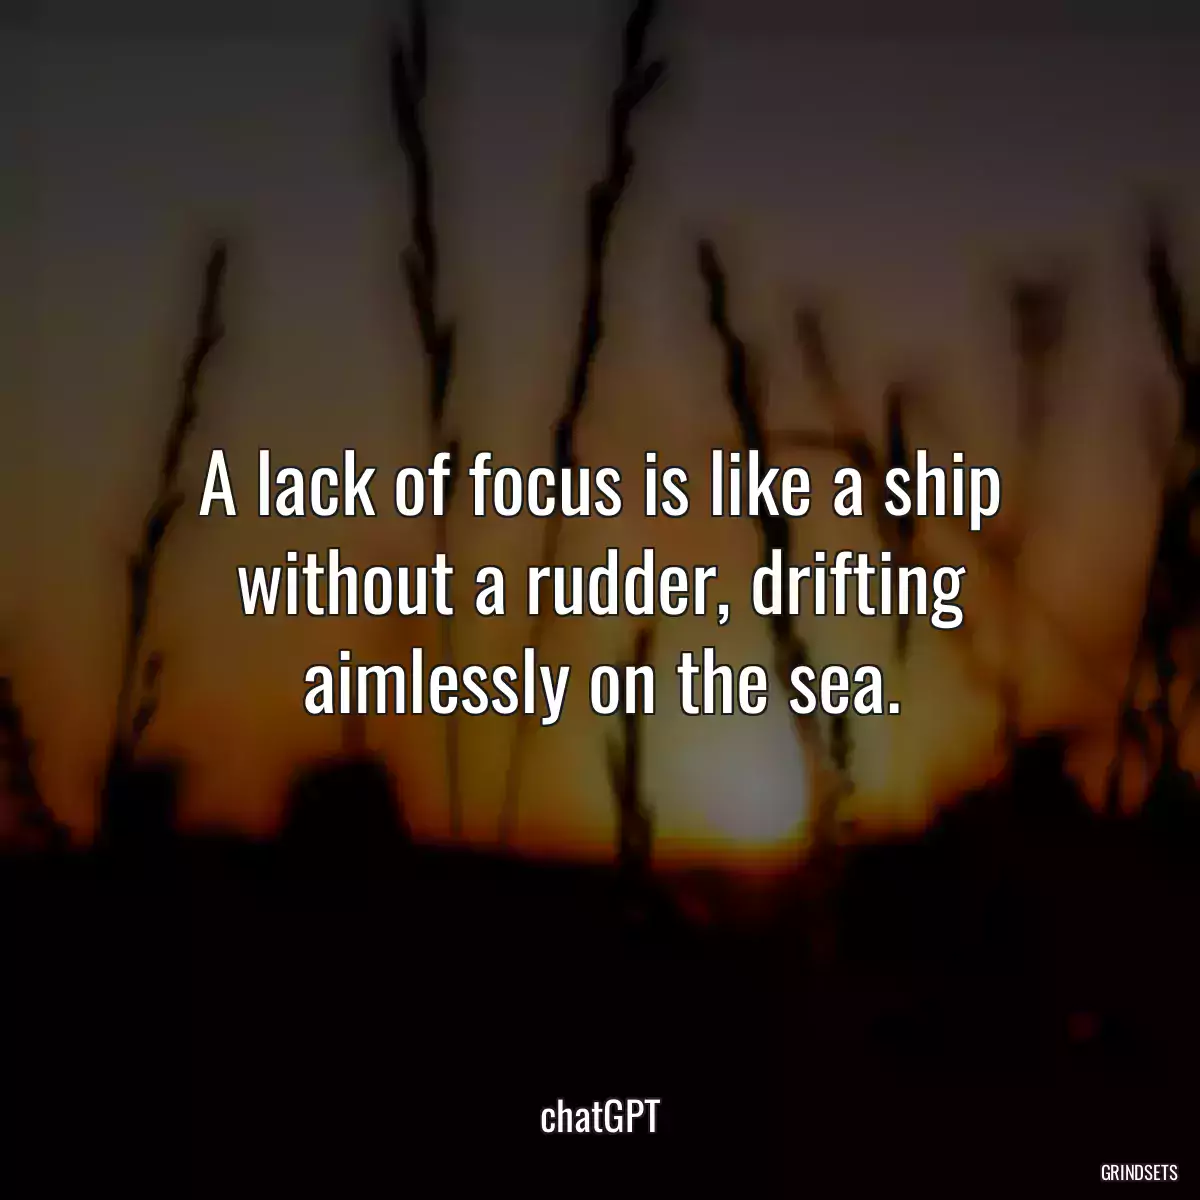 A lack of focus is like a ship without a rudder, drifting aimlessly on the sea.